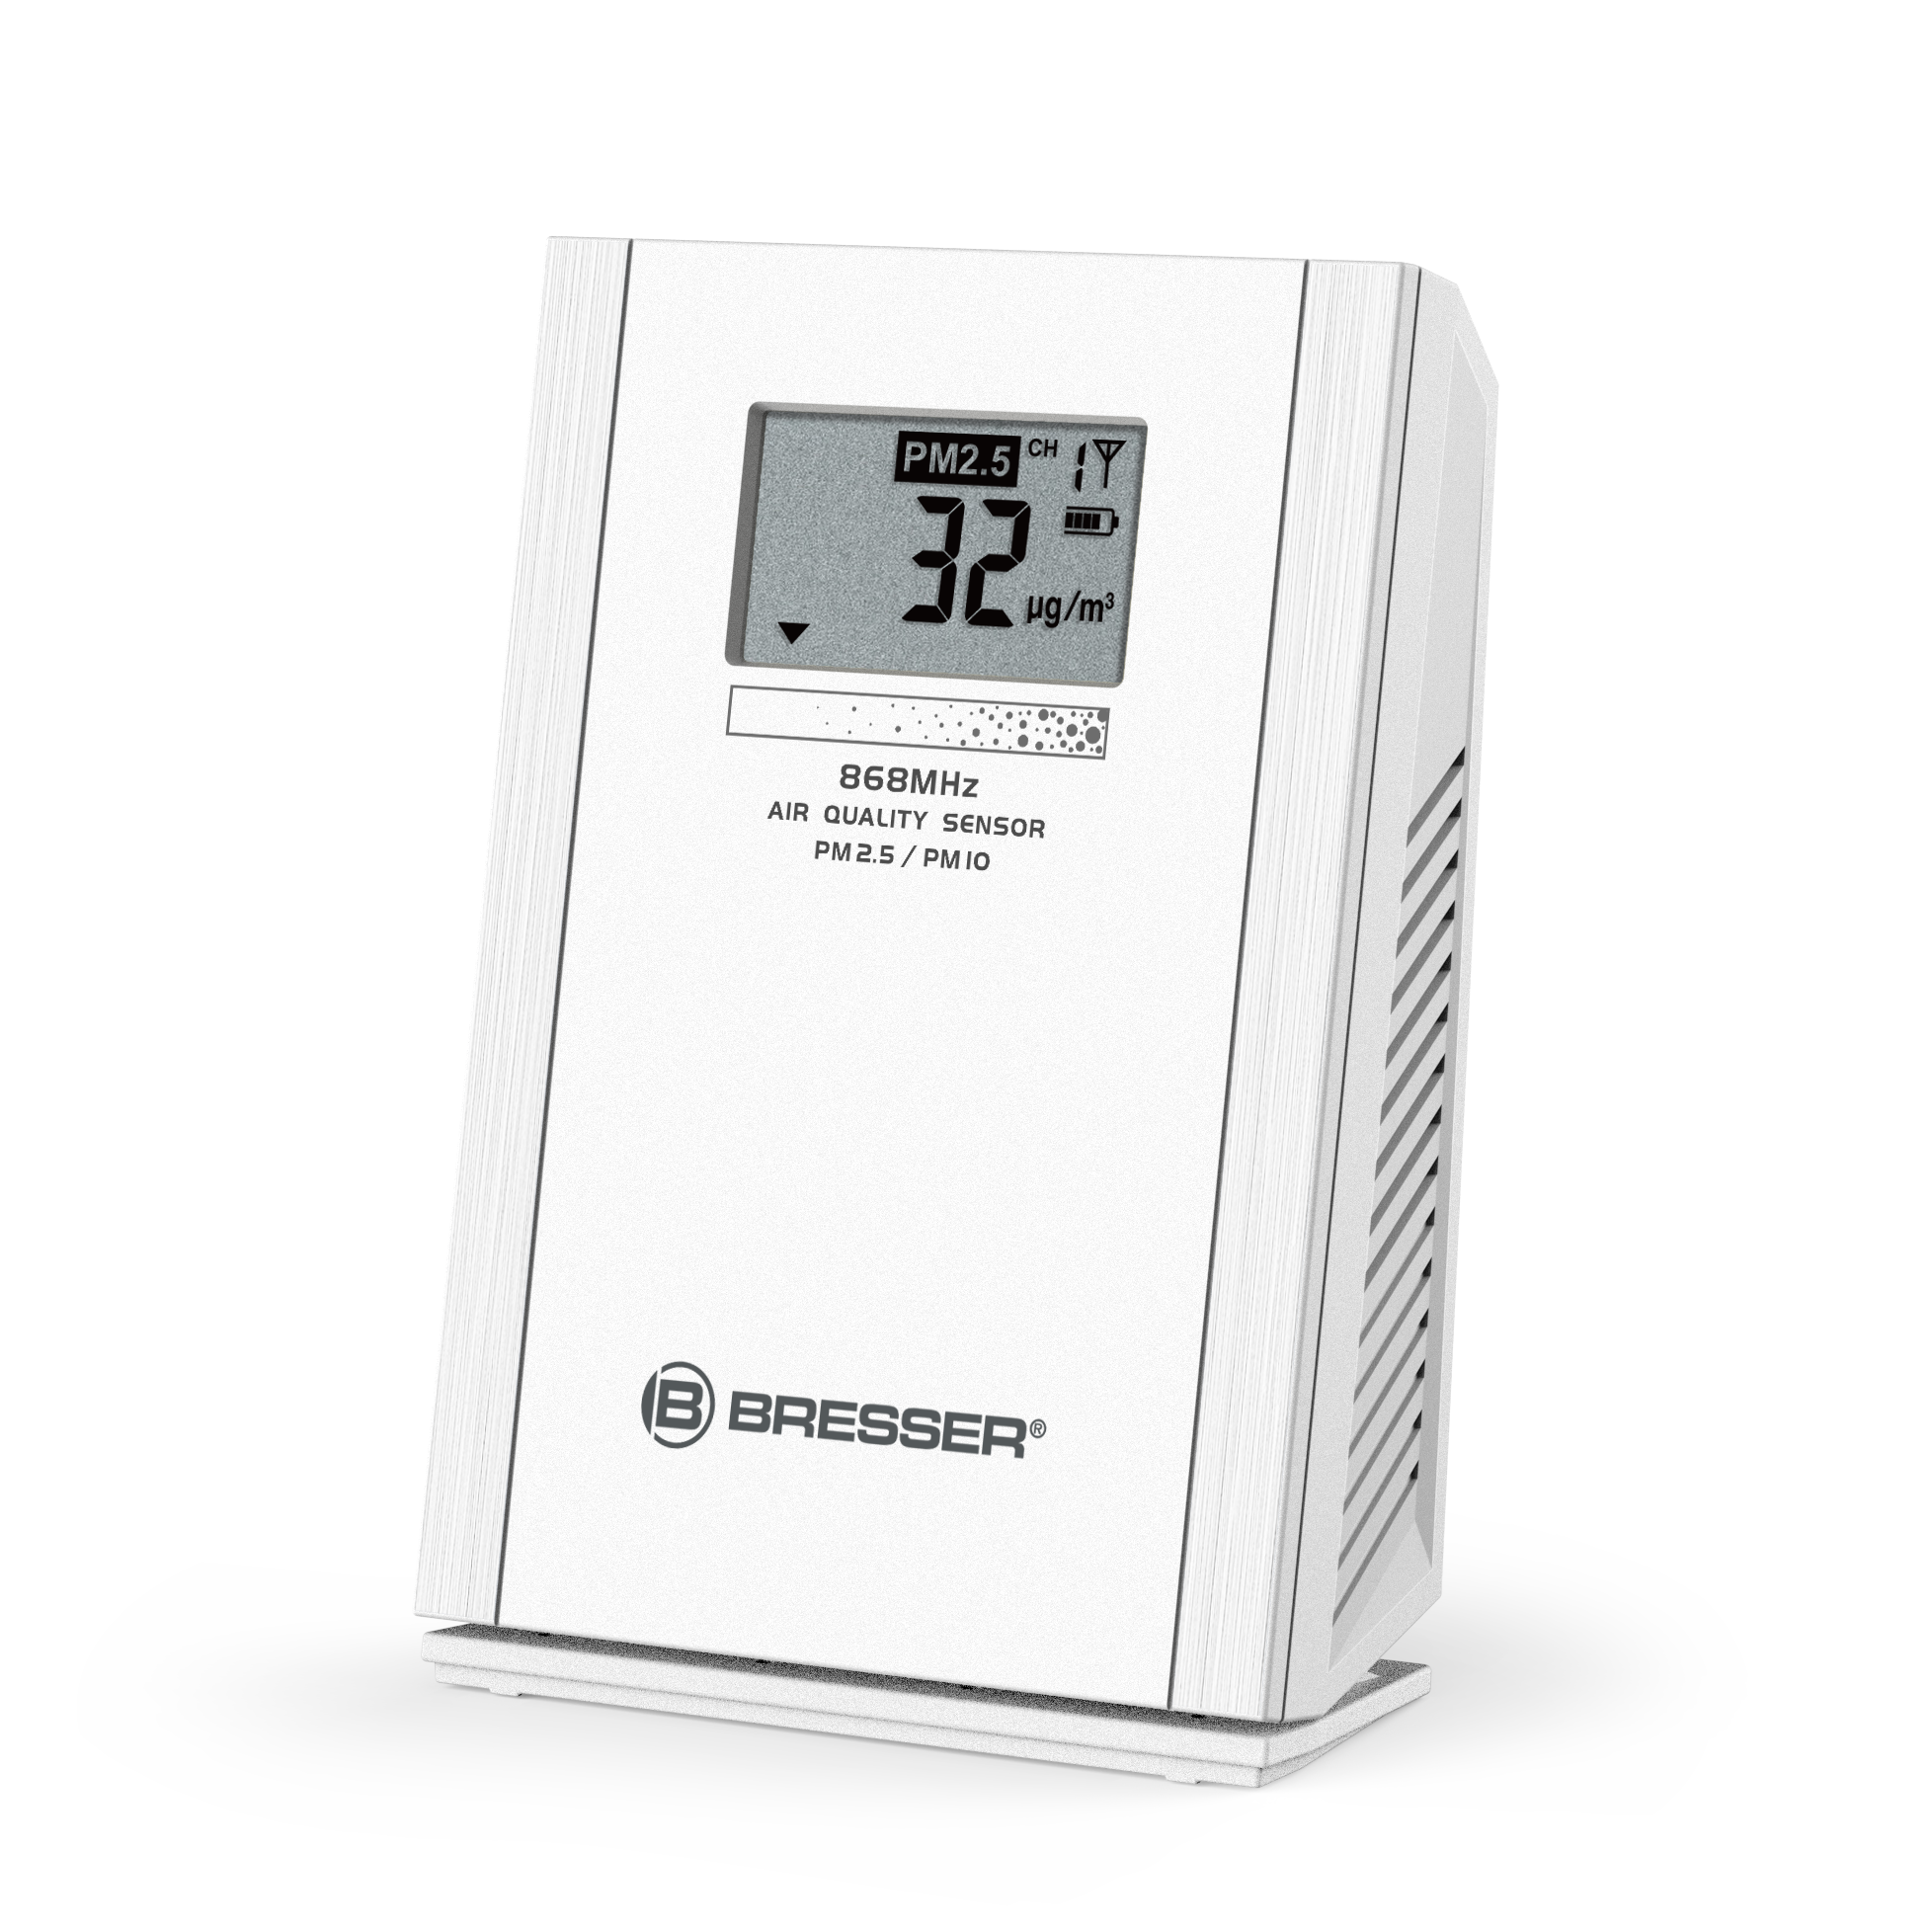 BRESSER PM2.5 / PM10 Particulate meter with wireless sensor